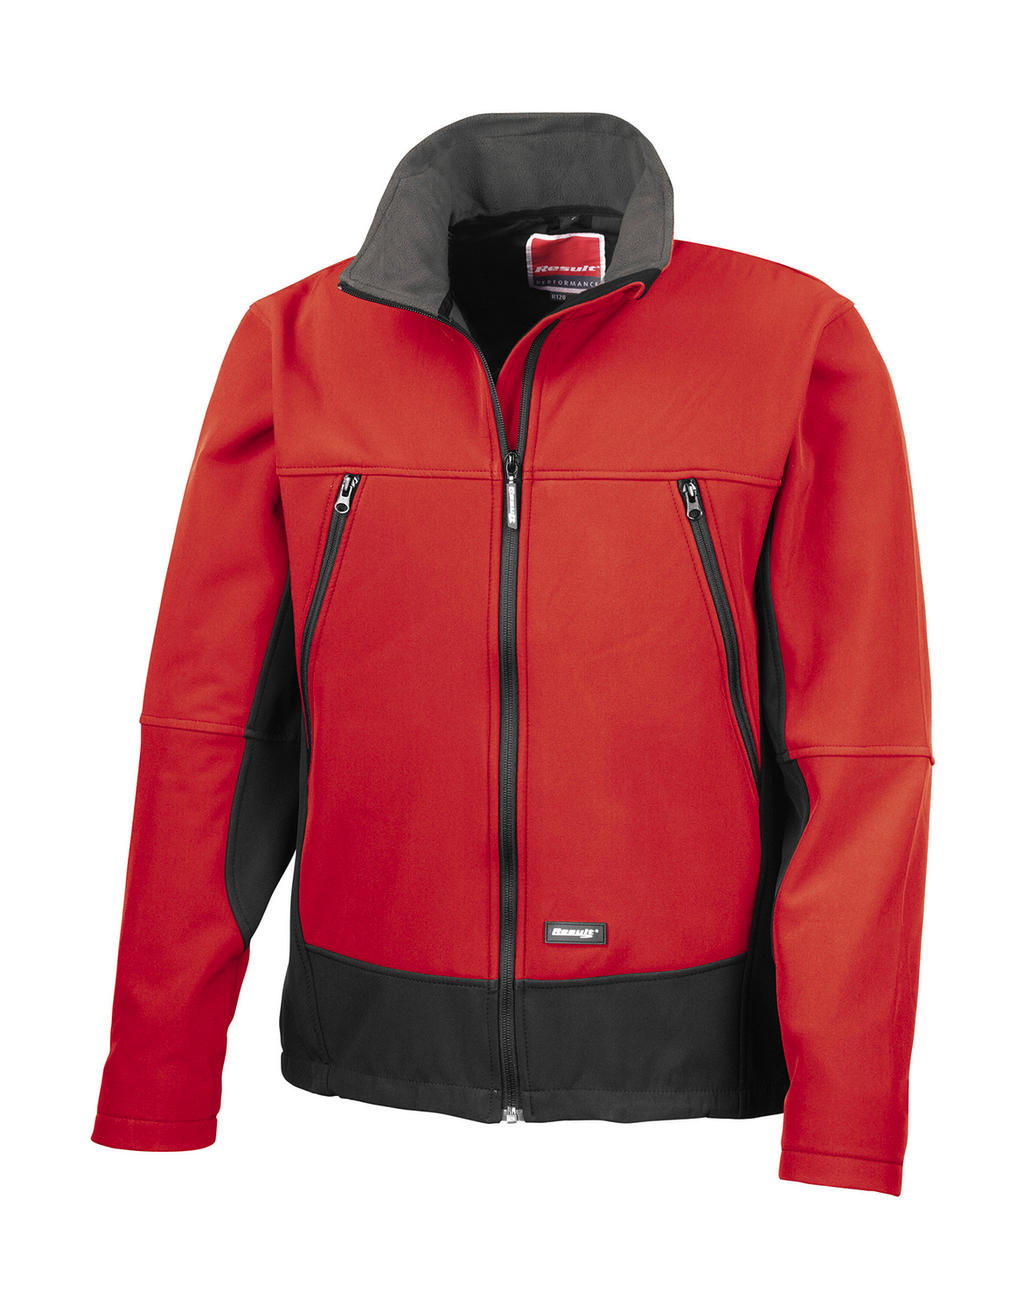  Softshell Activity Jacket in Farbe Red/Black